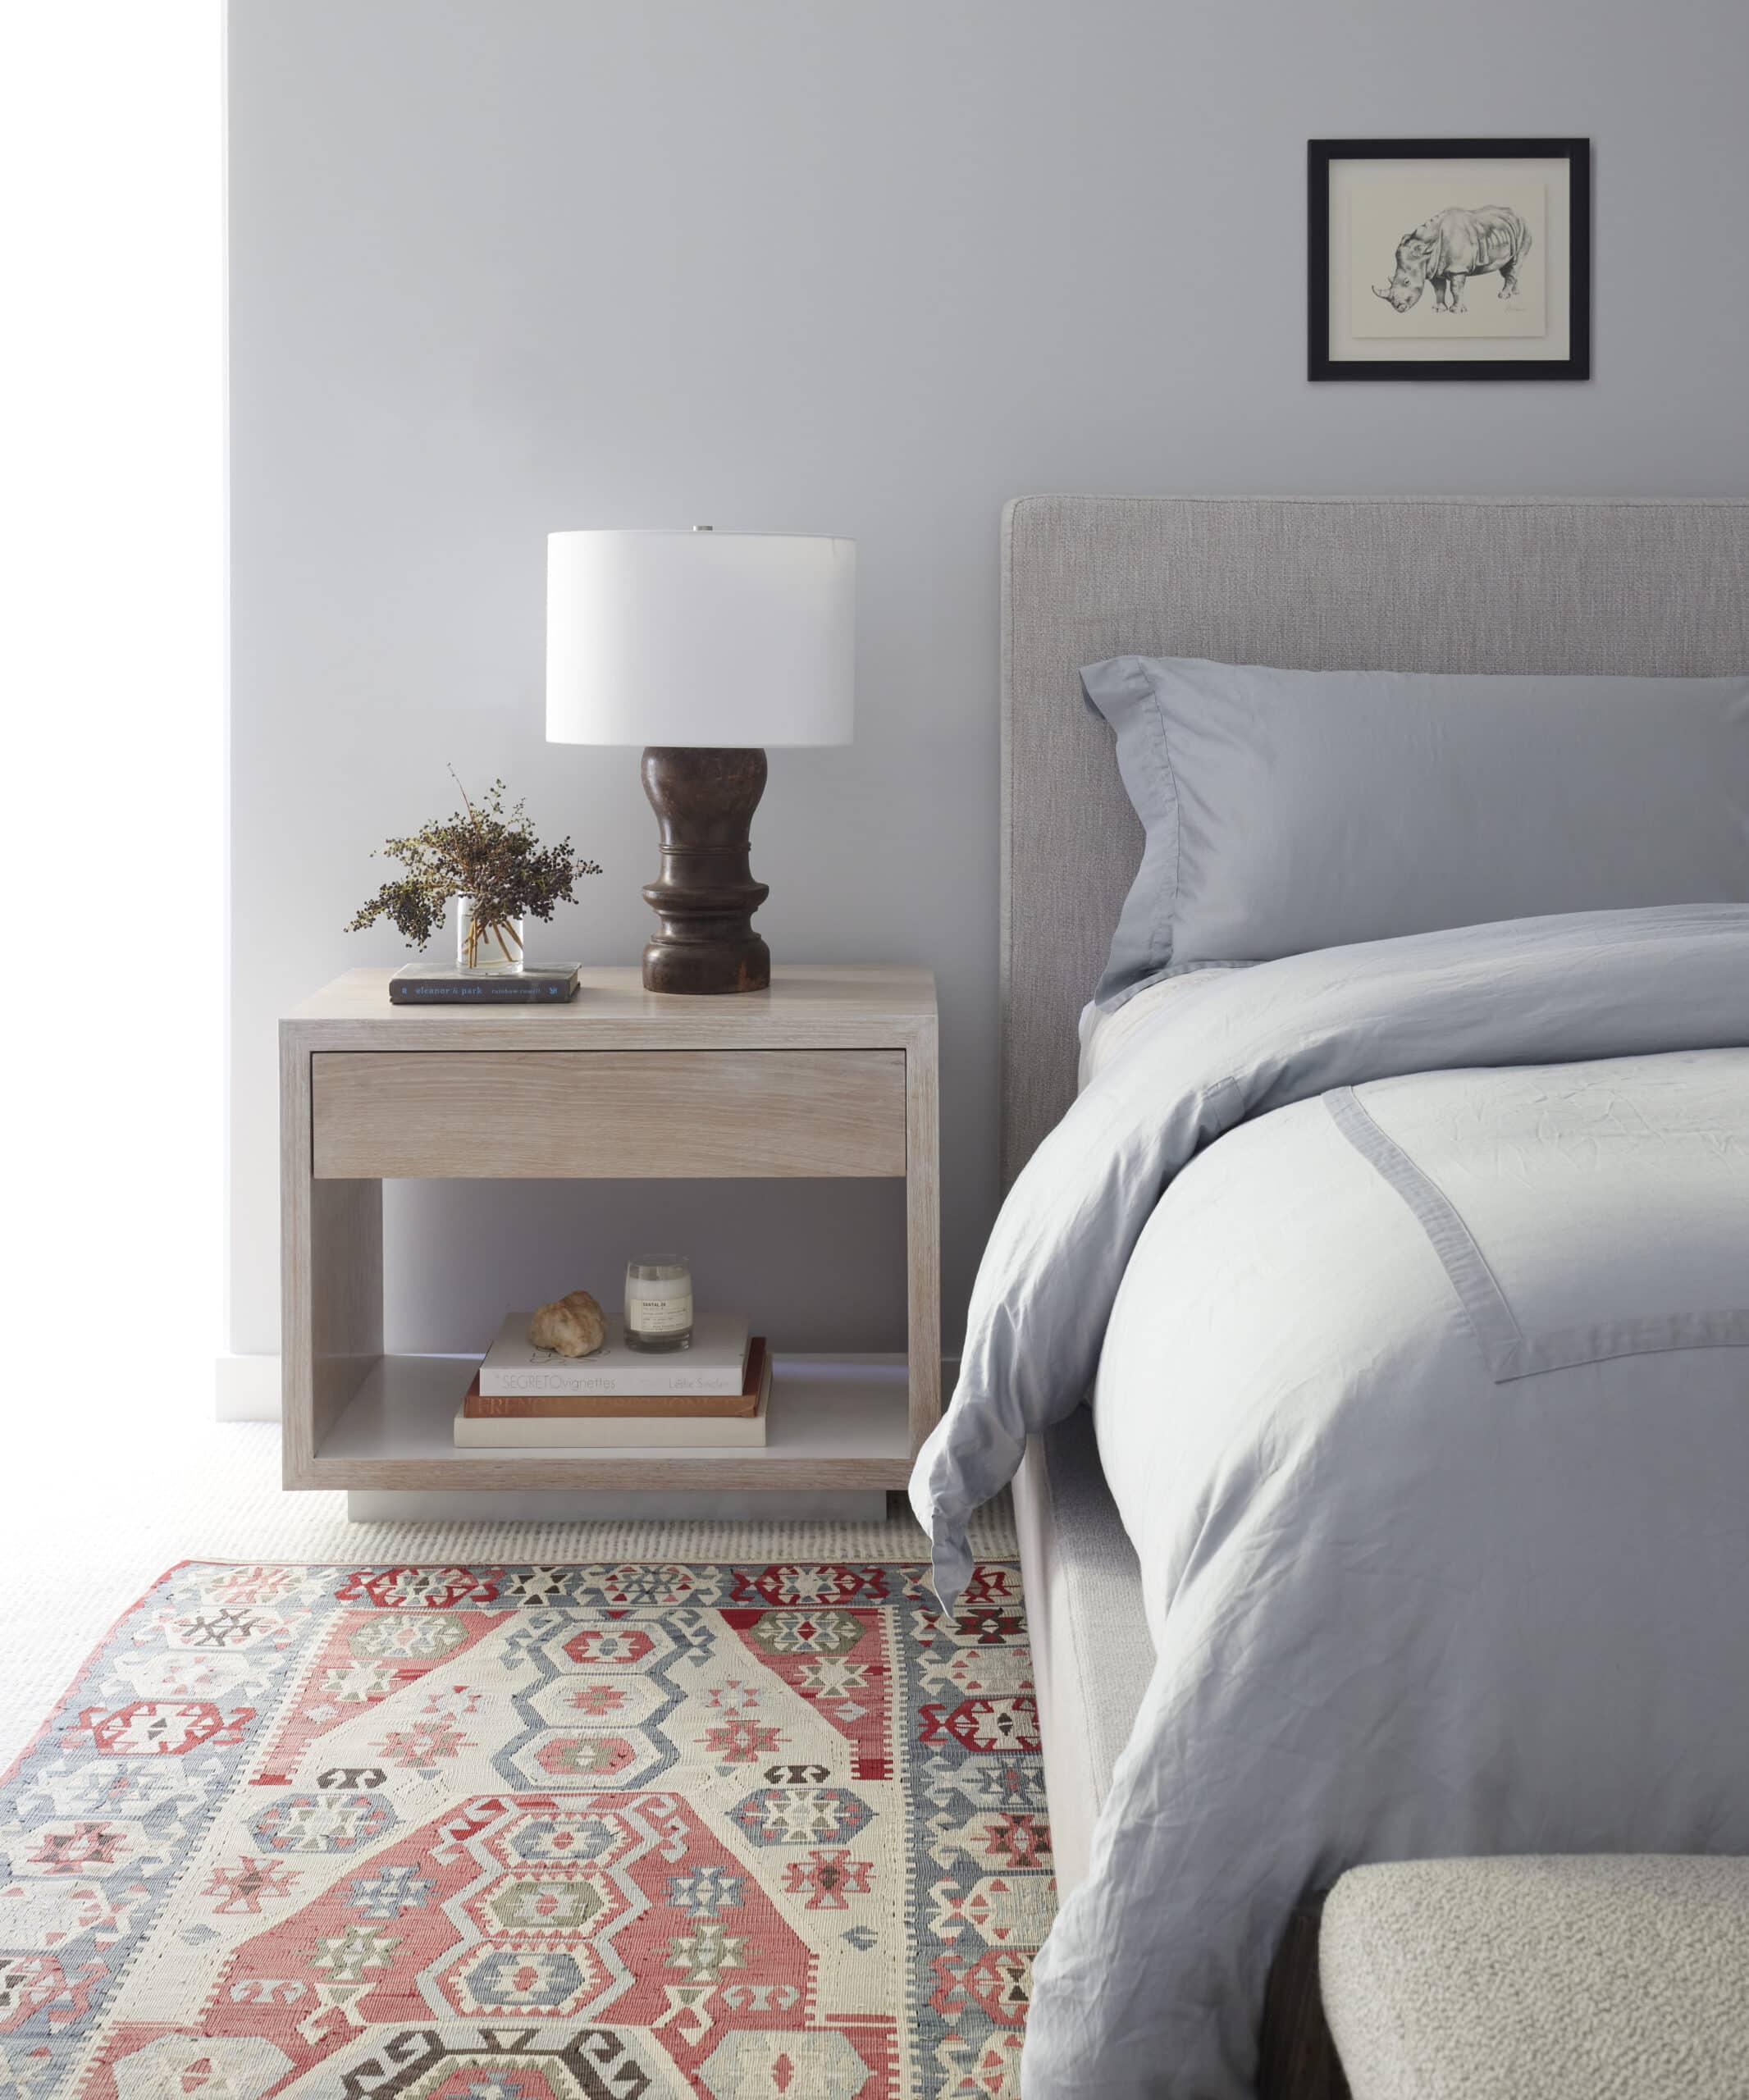 White bedroom with blue bedding, a wooden nightstand, a printed rug, and accessories.